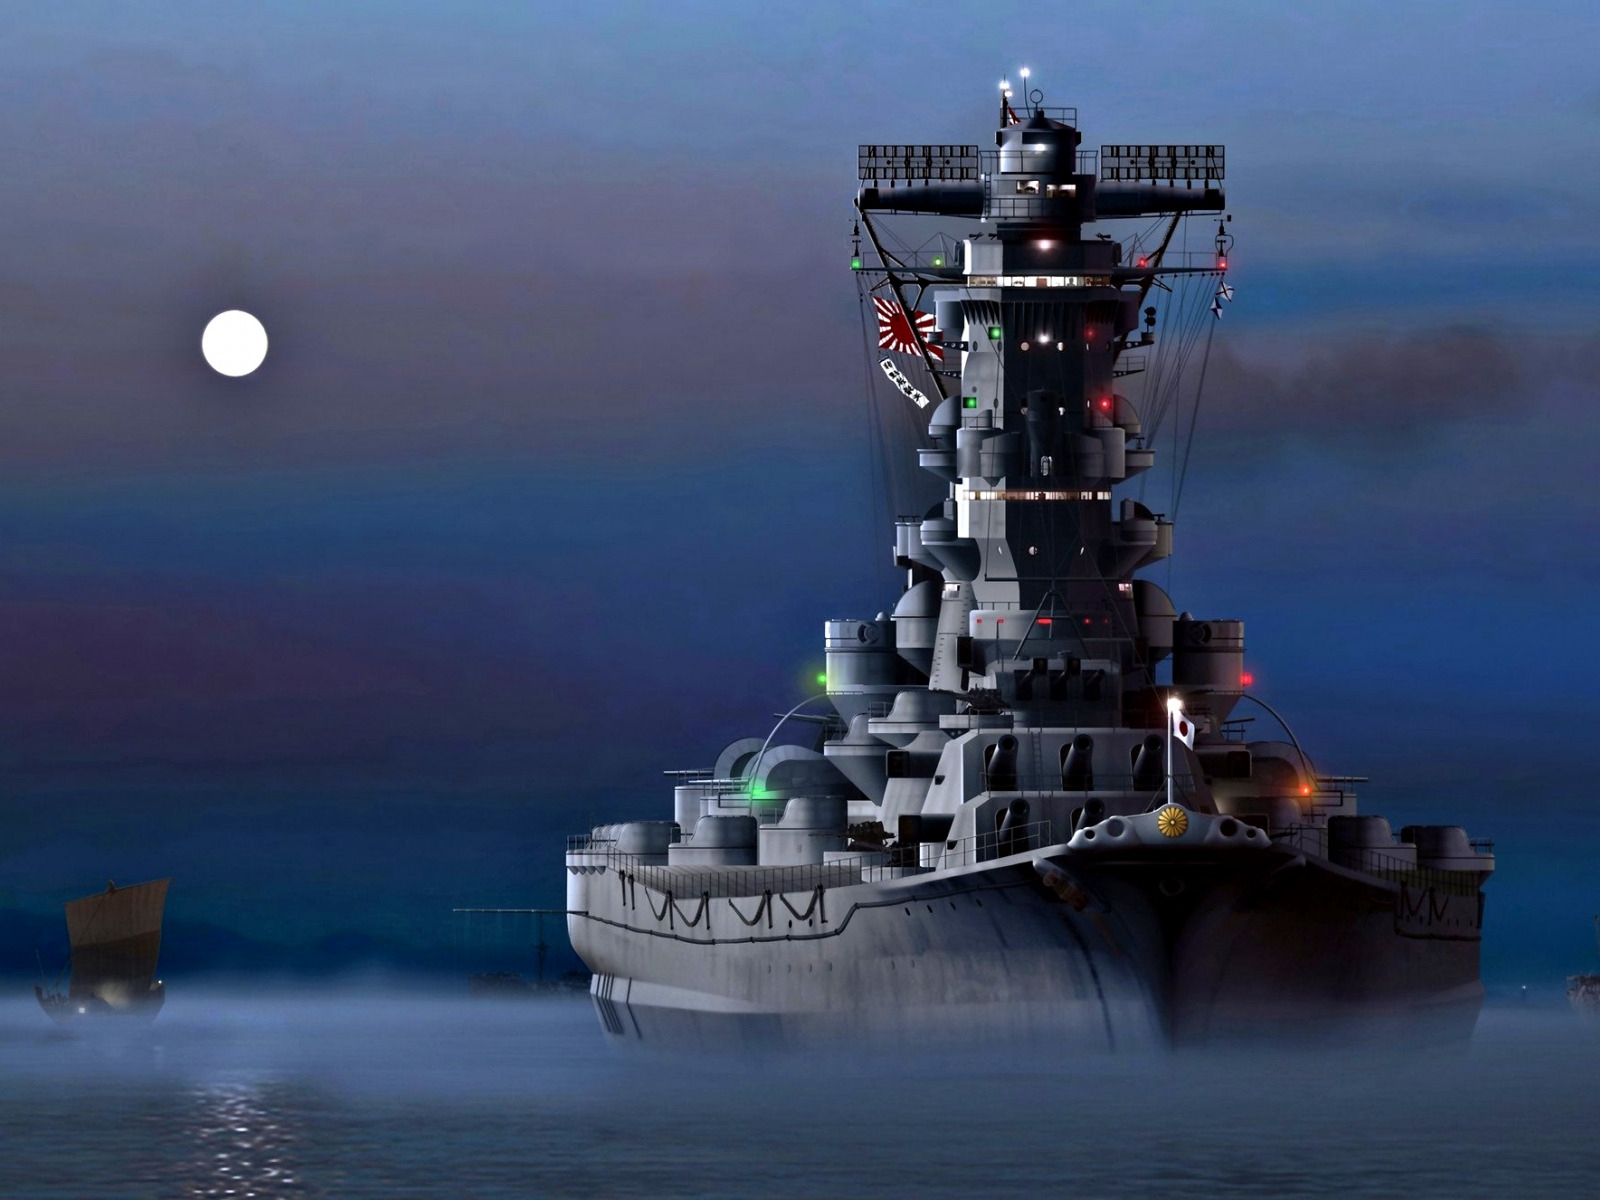 Download wallpaper Night, The moon, The Imperial Japanese Navy, Battleship, The Empire Of Japan, Yamato, section weapon in resolution 1600x1200